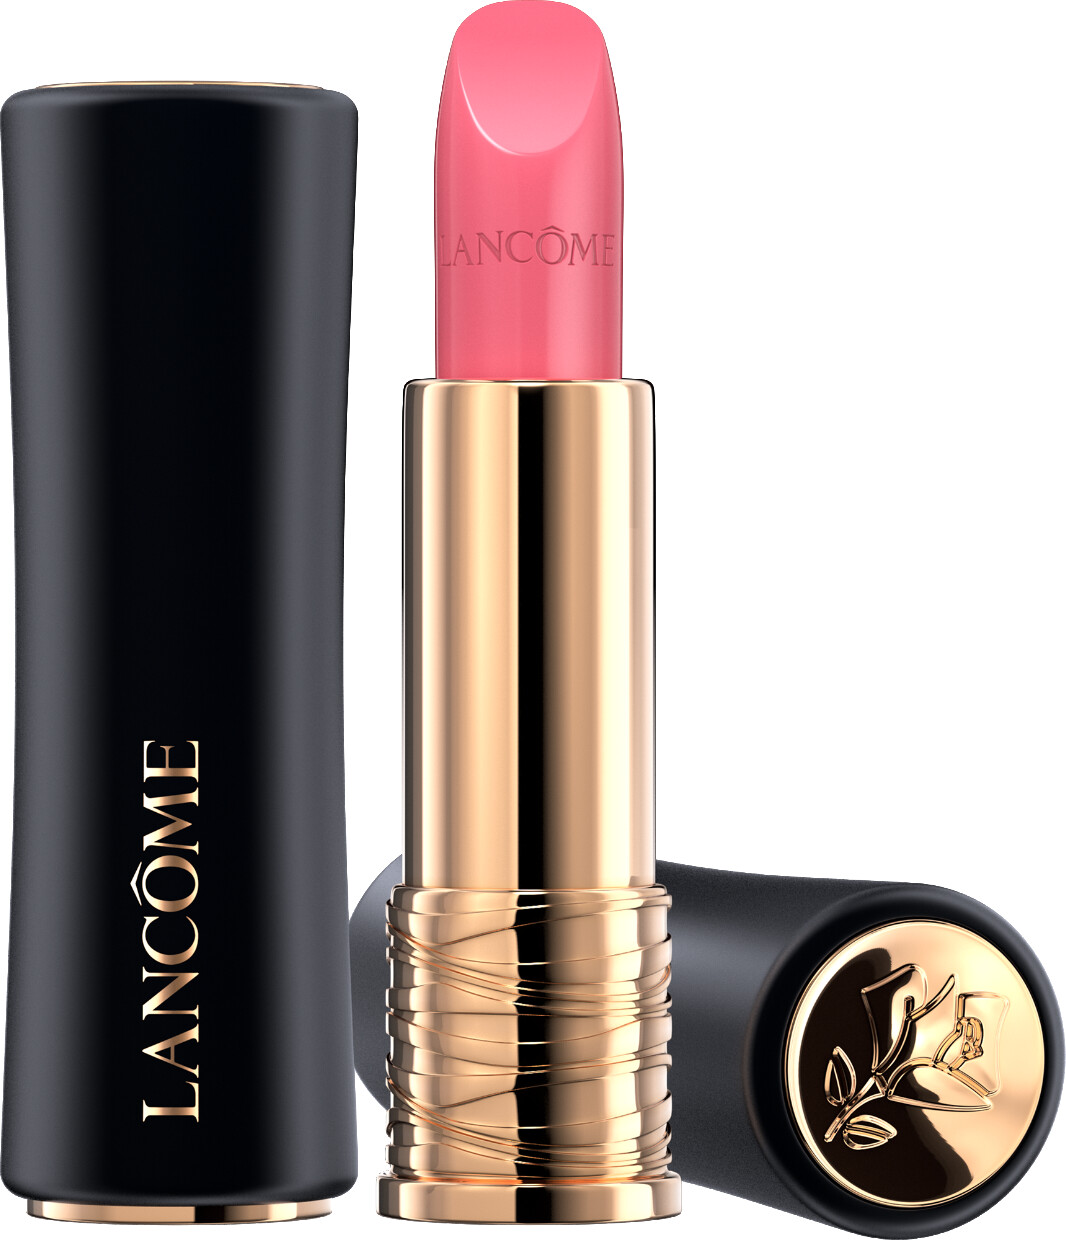 Lancome L'Absolu Rouge Cream Lipstick 3.4g 339 - Blooming Peonie